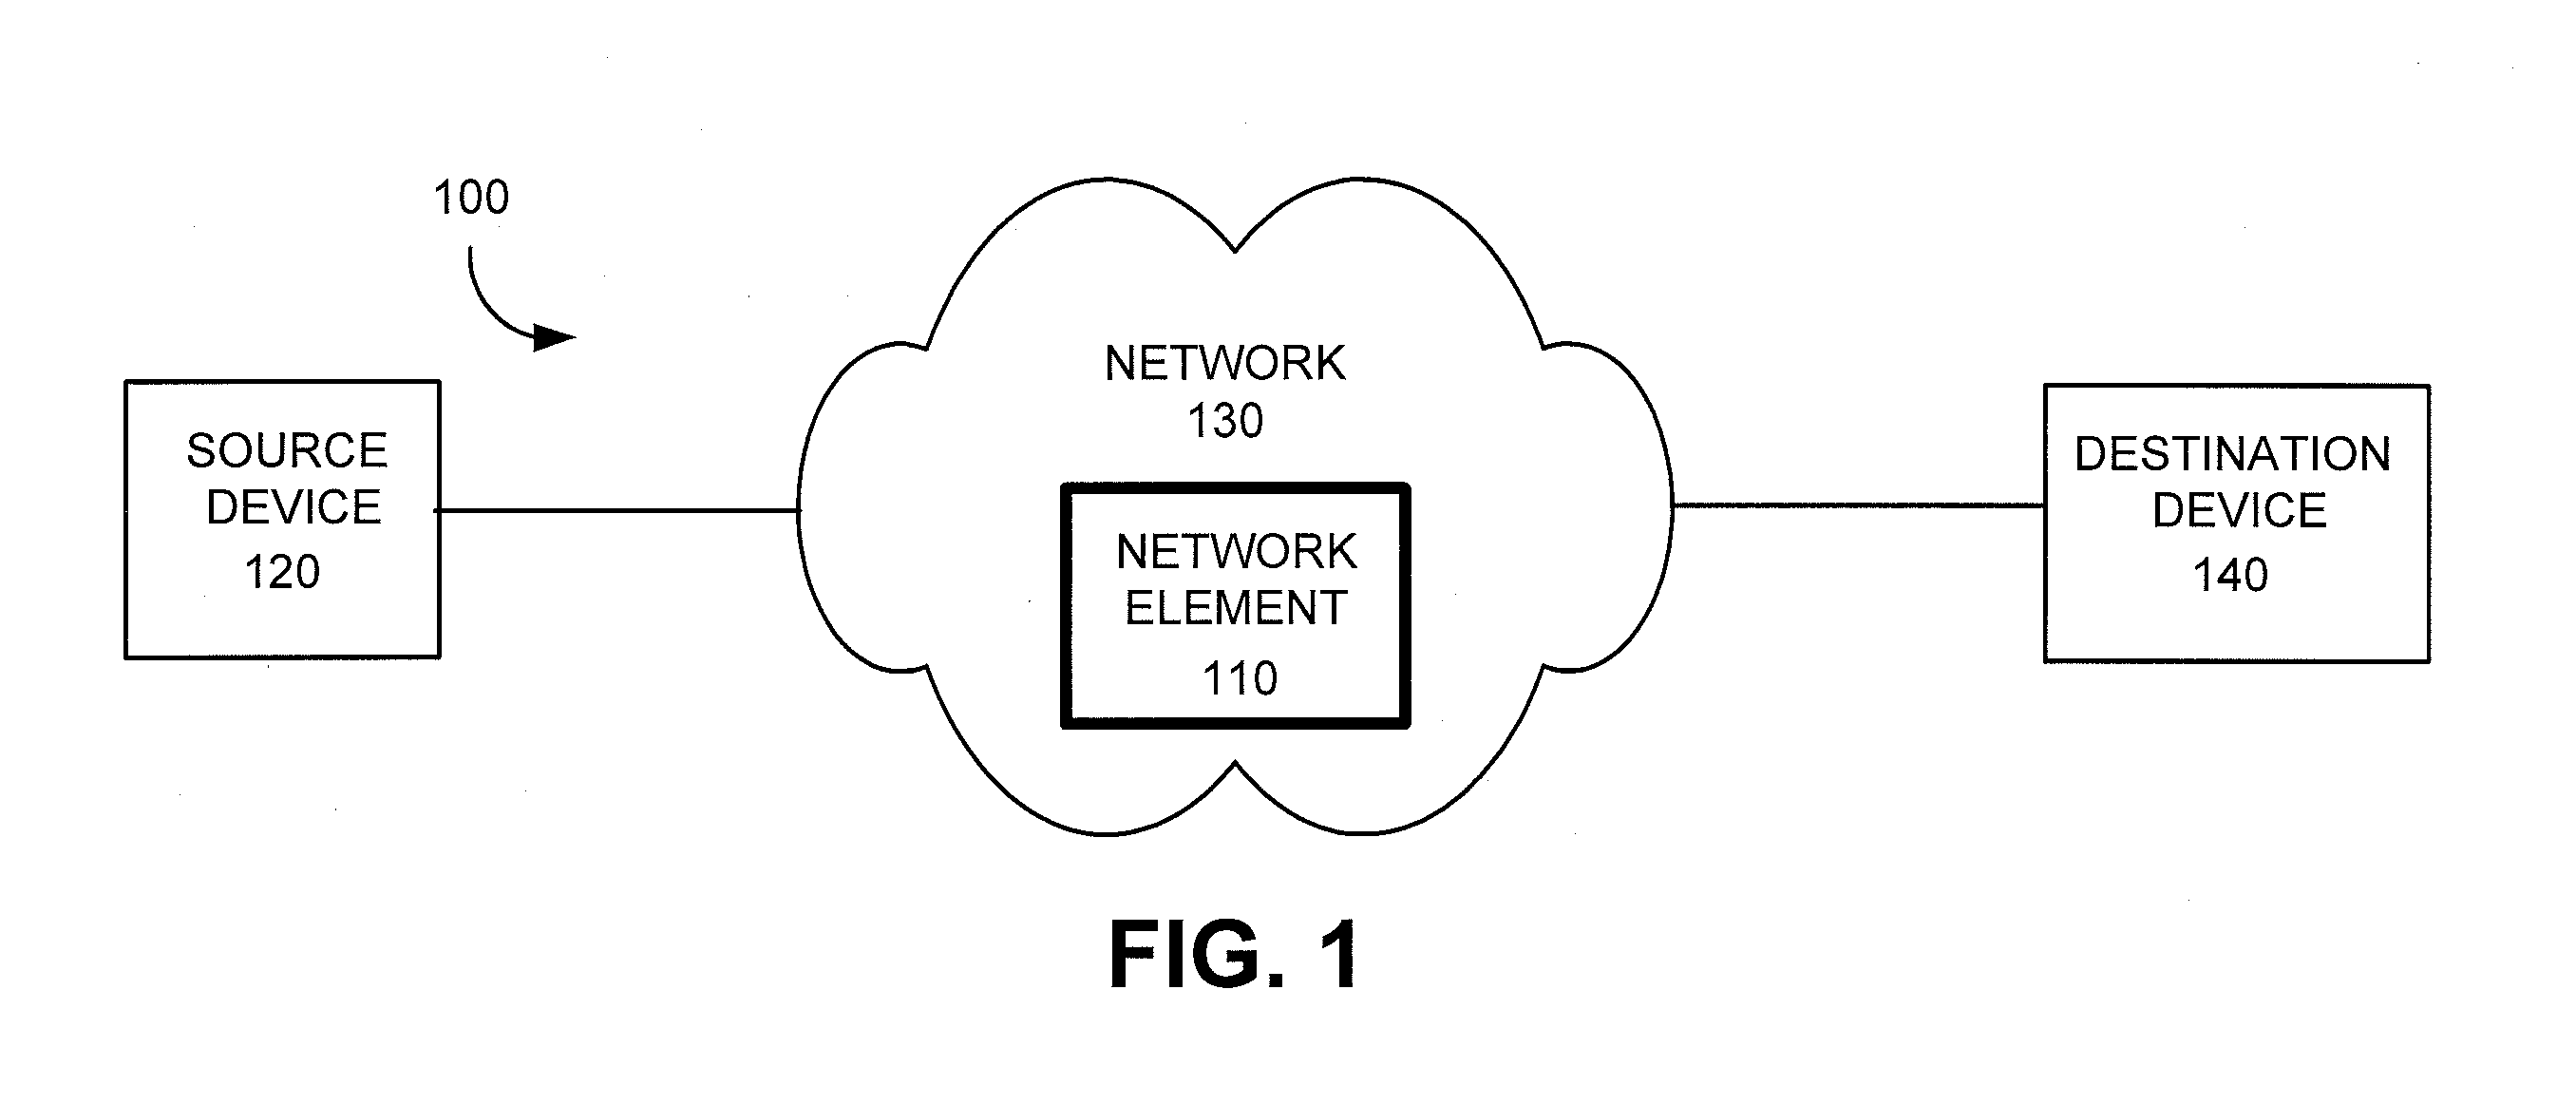 Method and apparatus for hitless failover in networking systems using single database